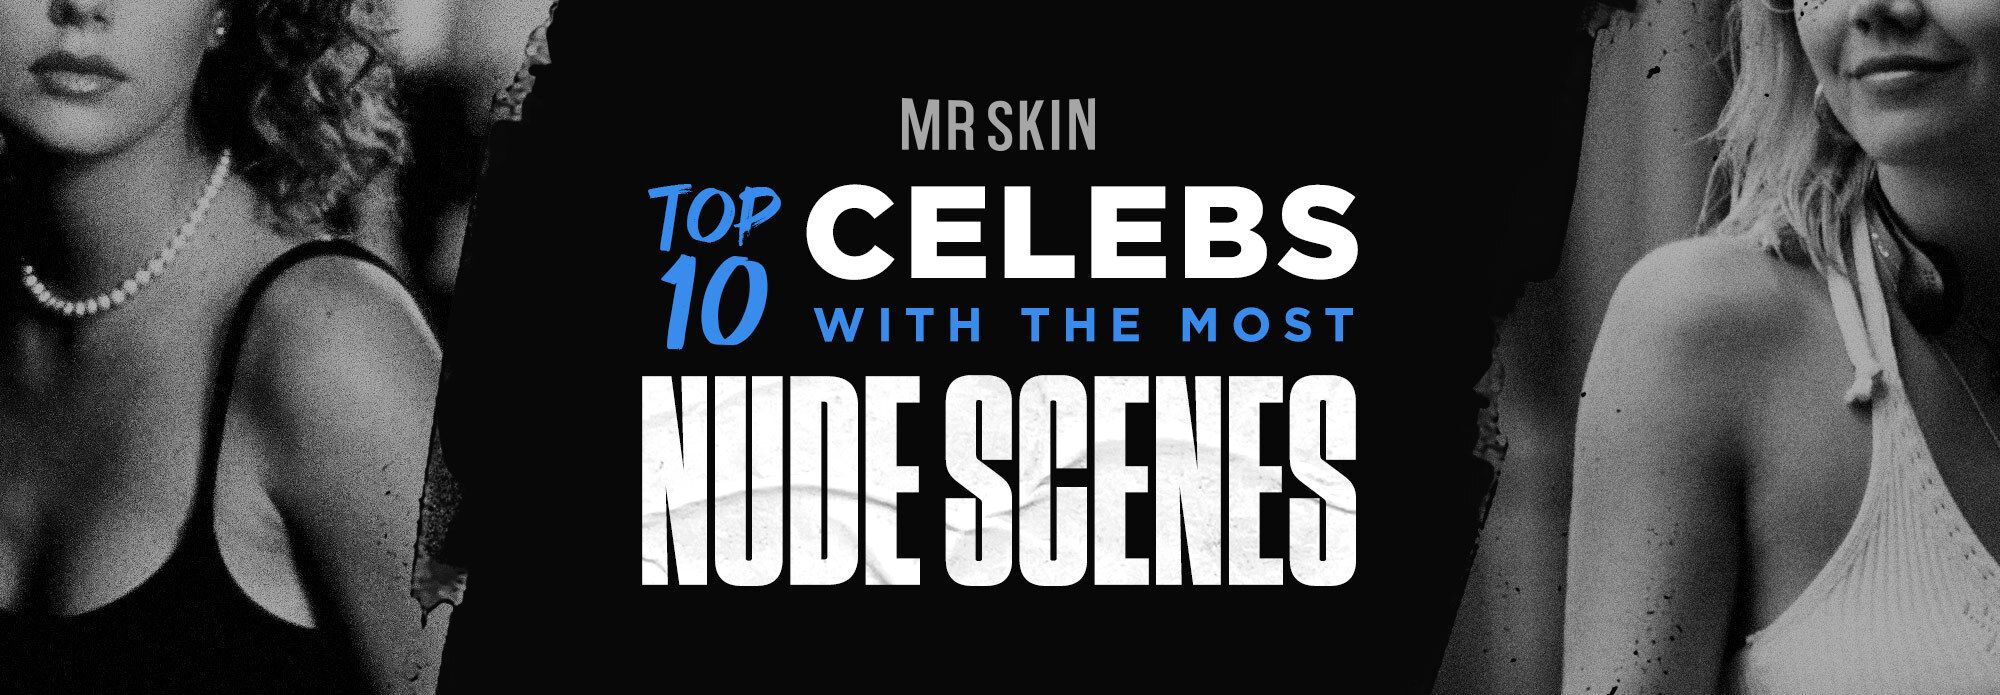 Celebs with the most nudes